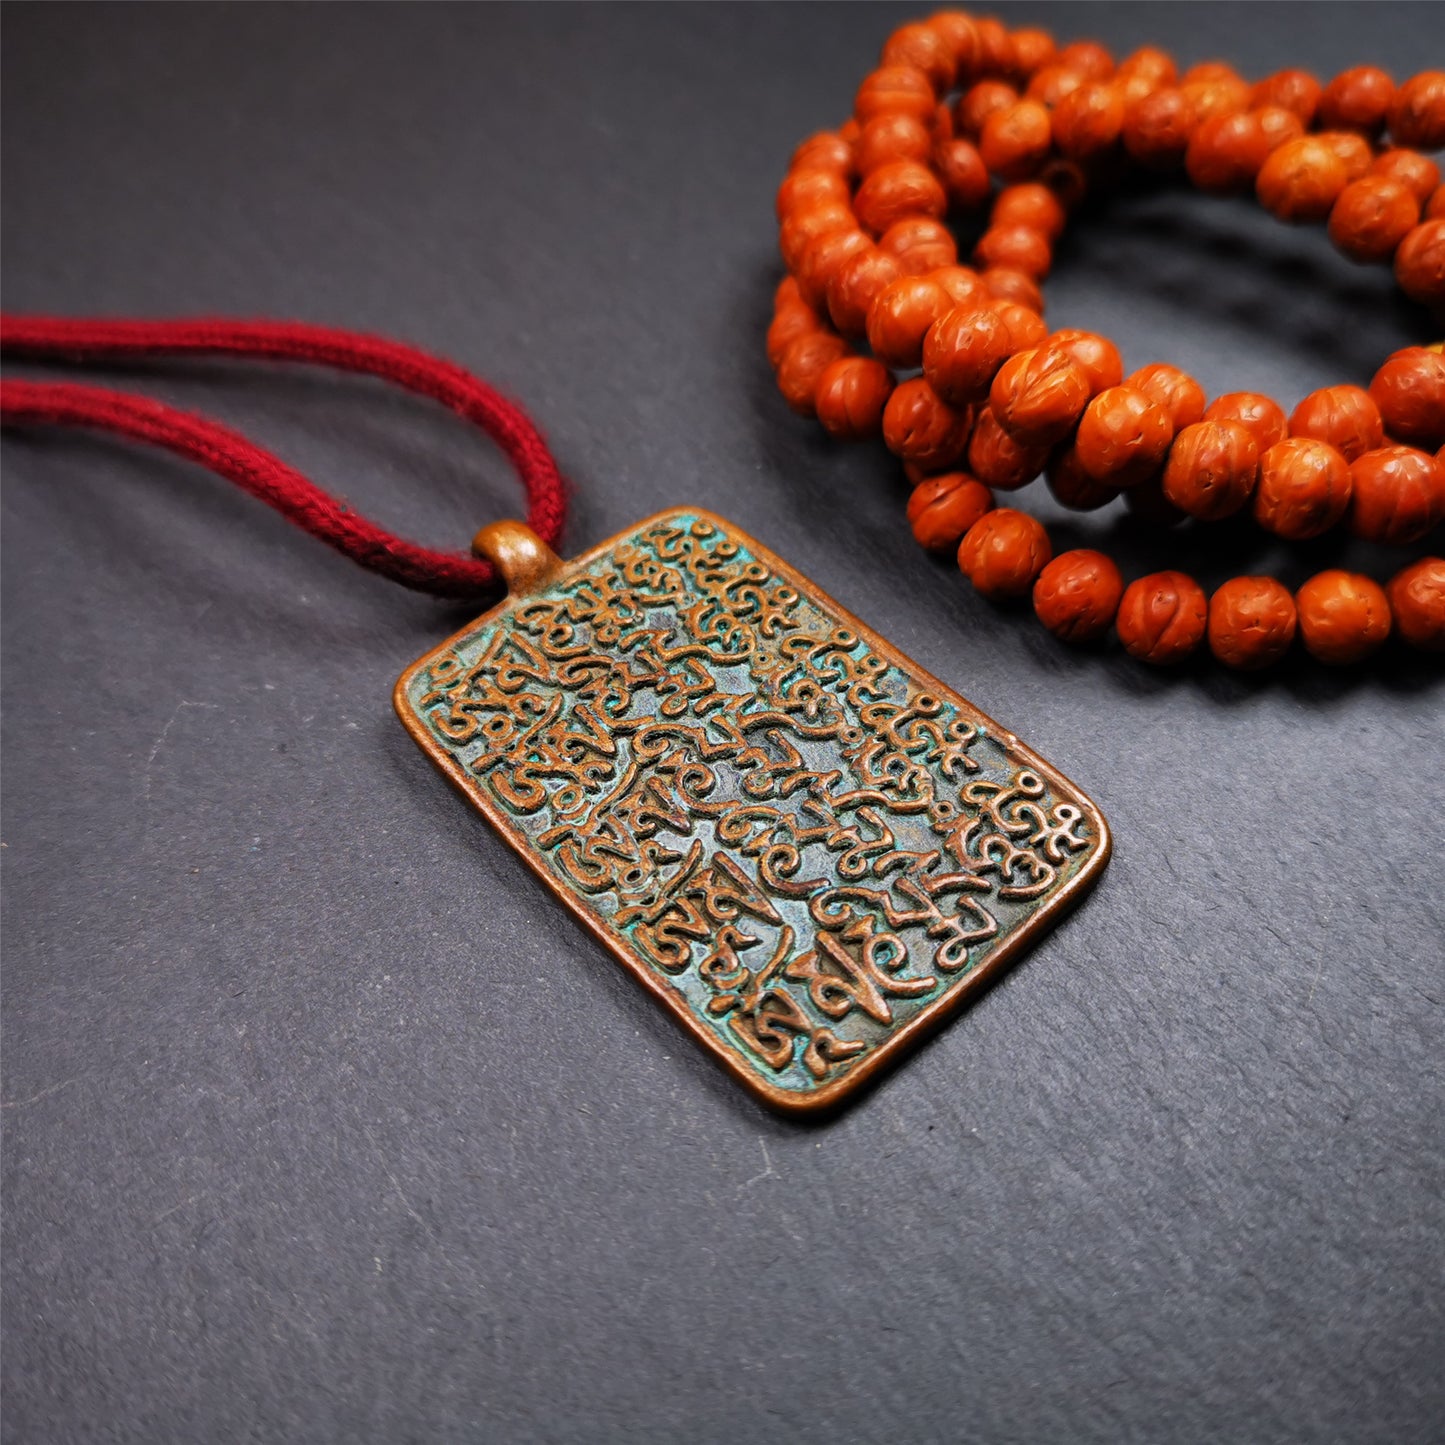 This badge is made by Tibetan craftsmen from Hepo Town, Baiyu County, the birthplace of the famous Tibetan handicrafts. It is made of copper, 2.44 × 1.42 inches. The front is the OM mantra and the back is body, speech, and mind.